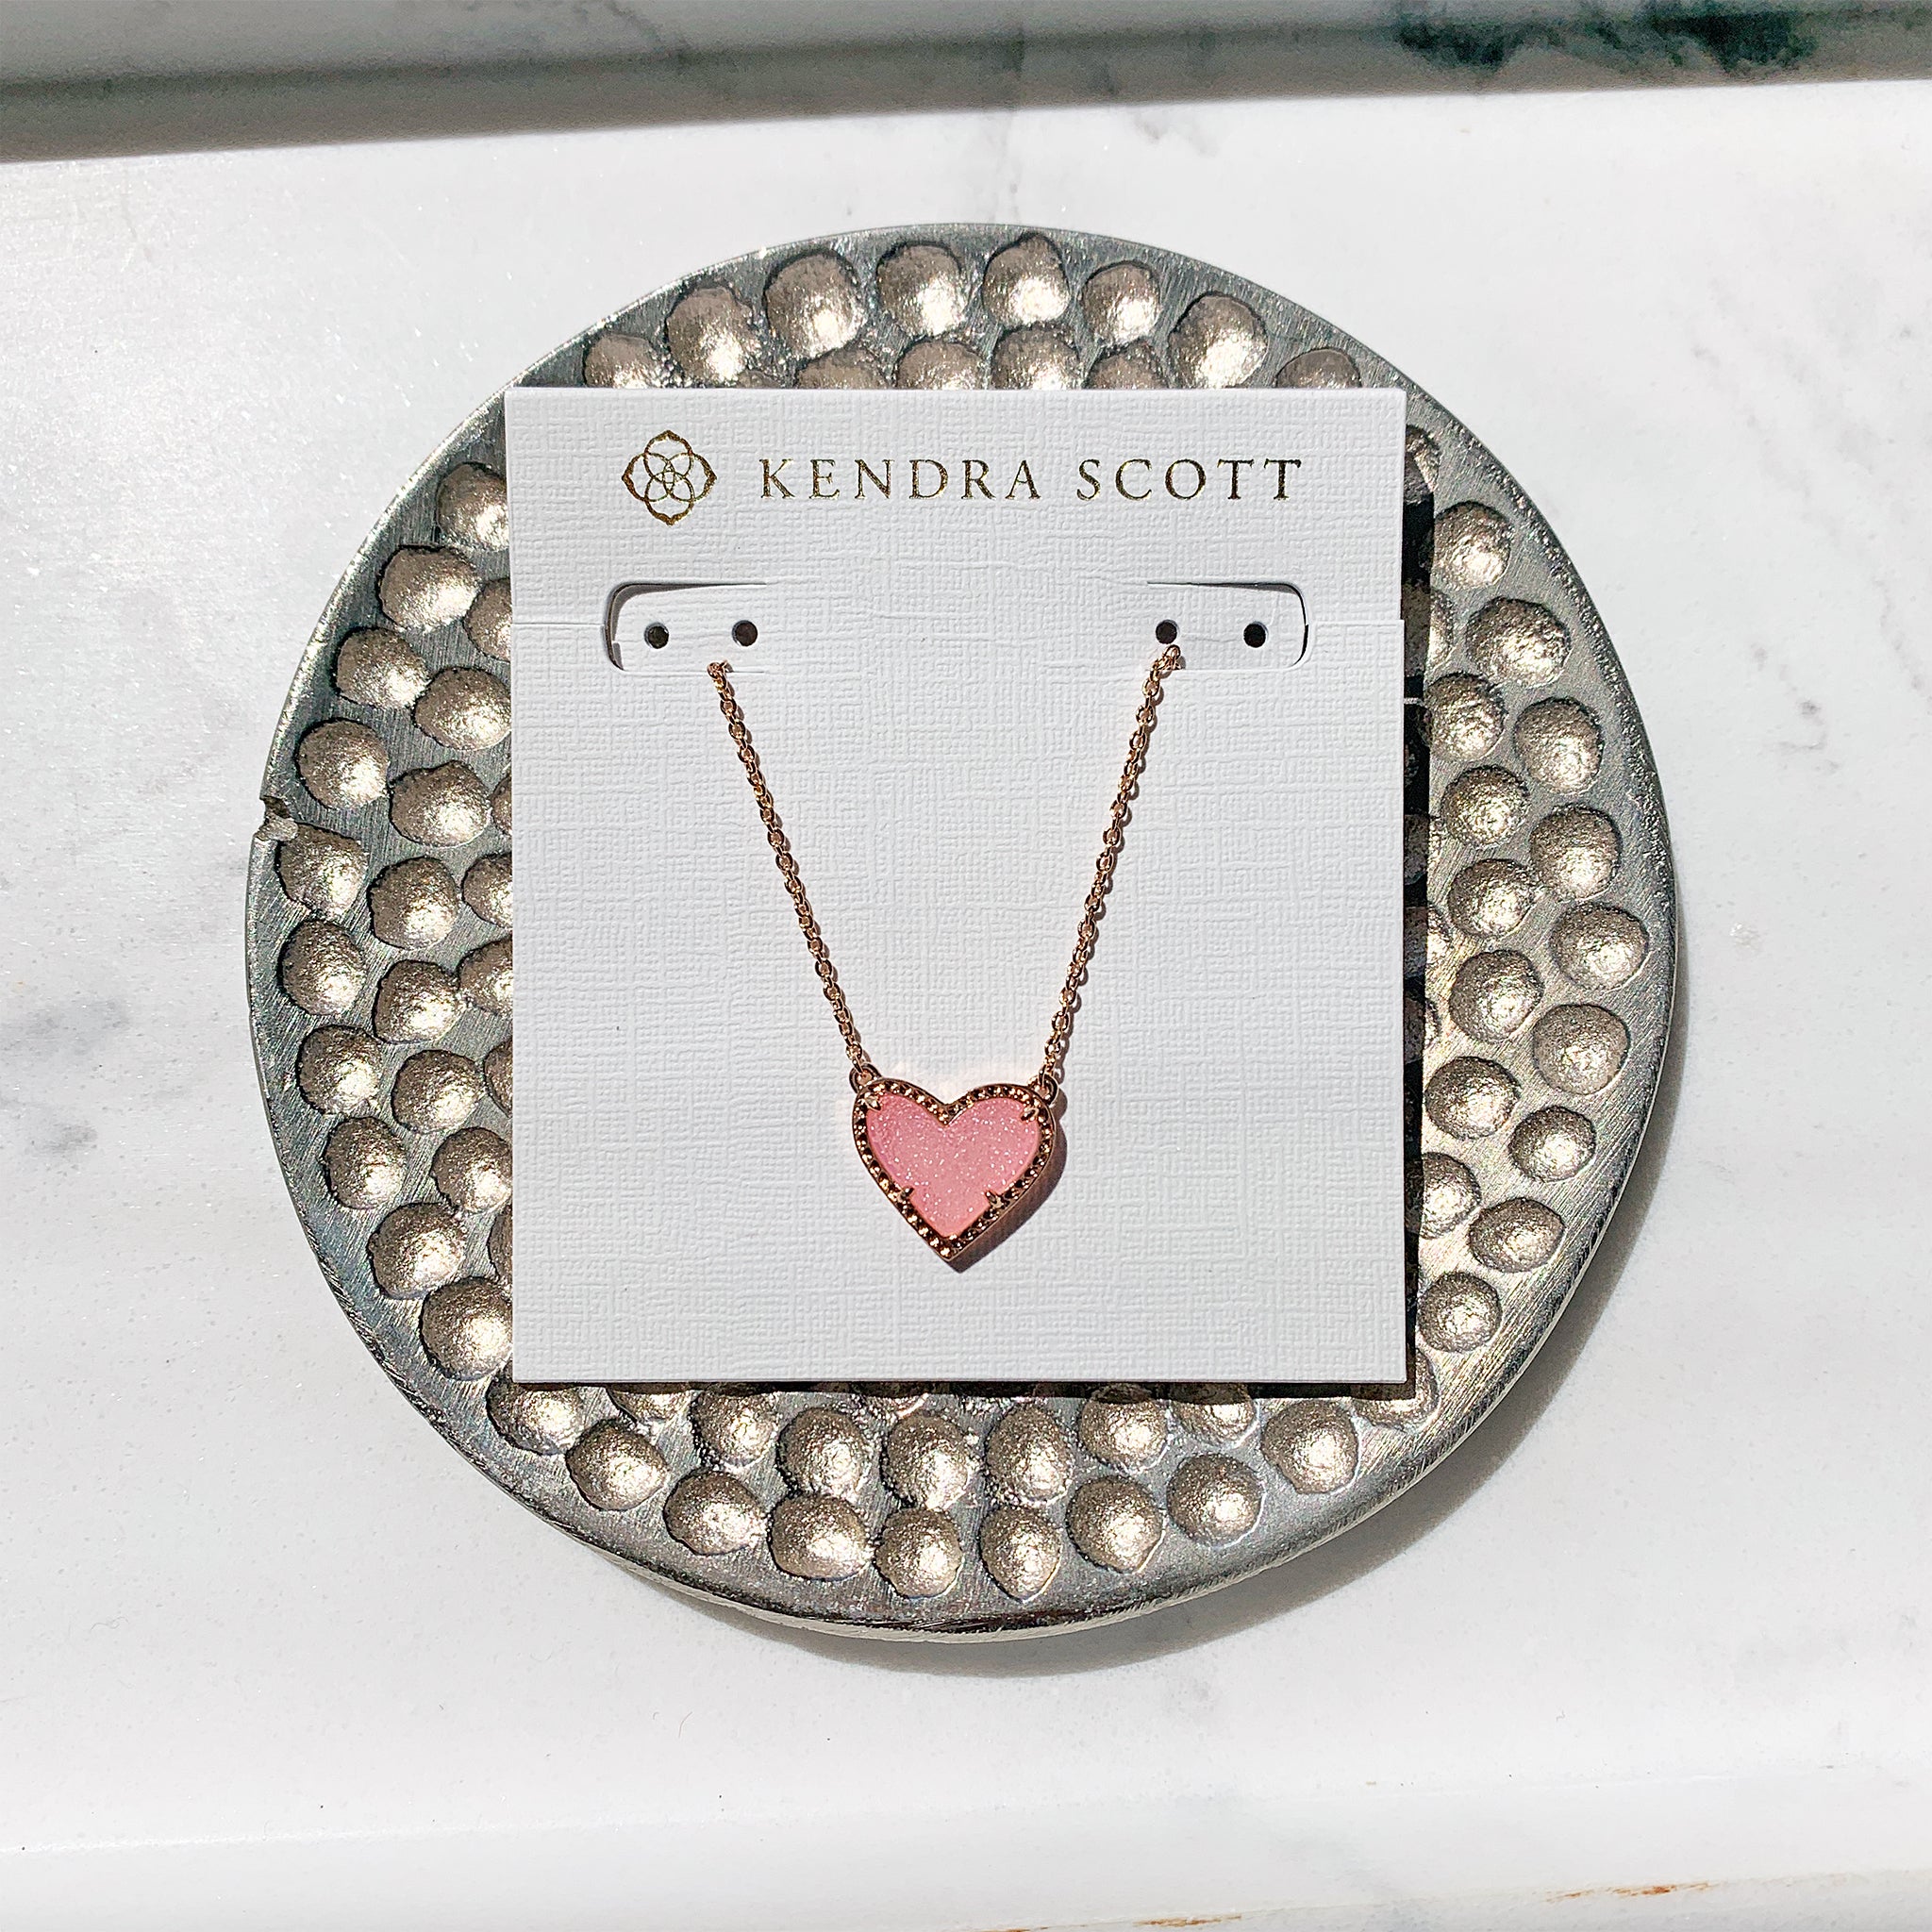 Kendra Scott Ari Heart Pendant Necklace in Pink Drusy and Rose Gold